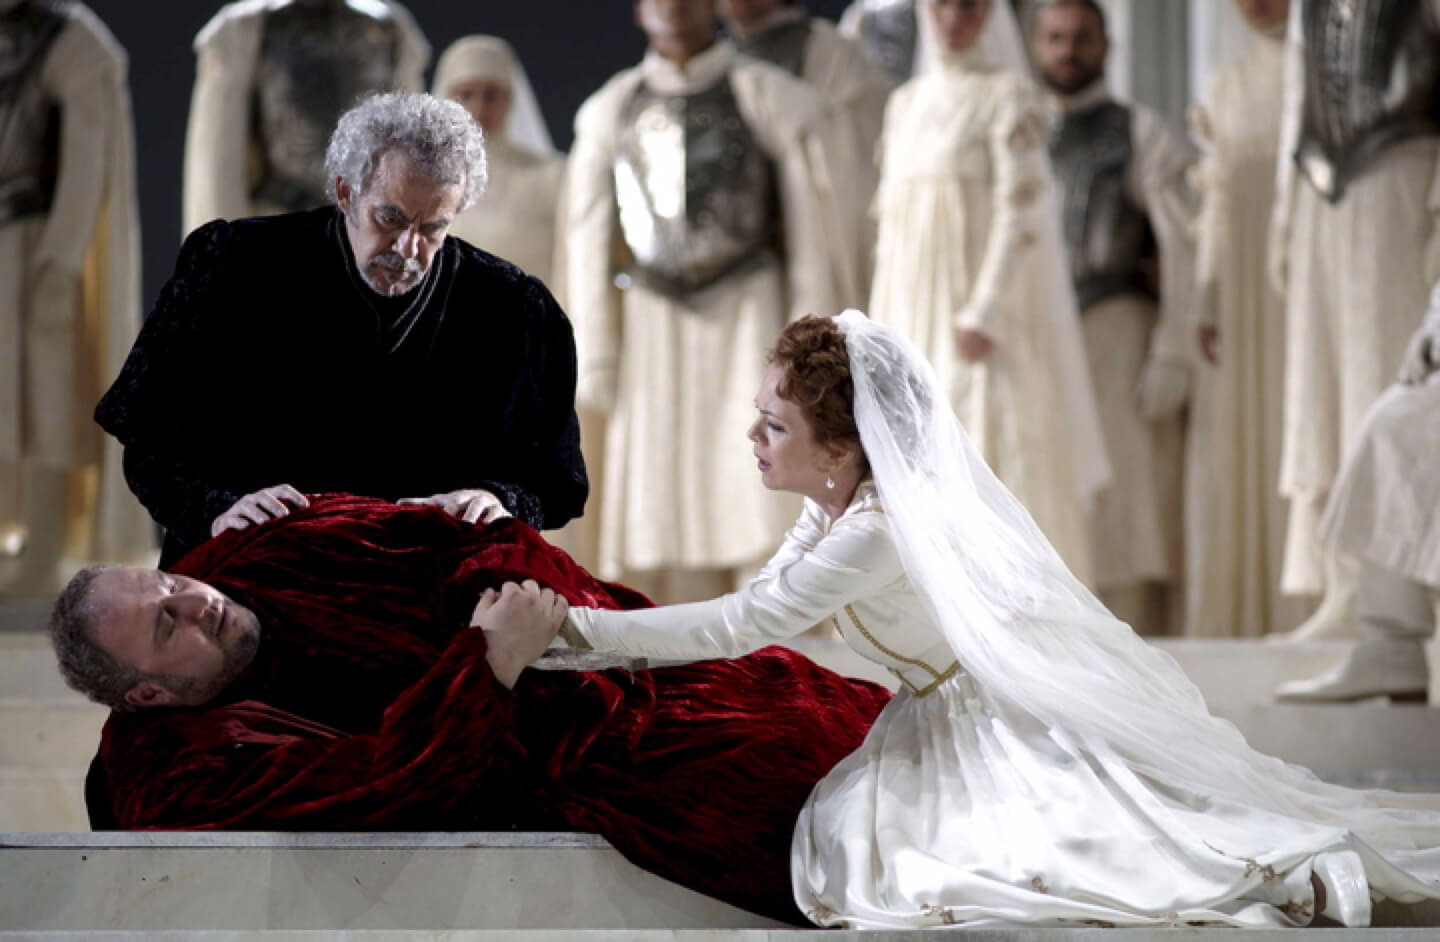 07. Scene from the opera by Verdi at the Teatro Real, 'Simon Boccanegra'. (2010) Photo: EFE/Javier at the Real